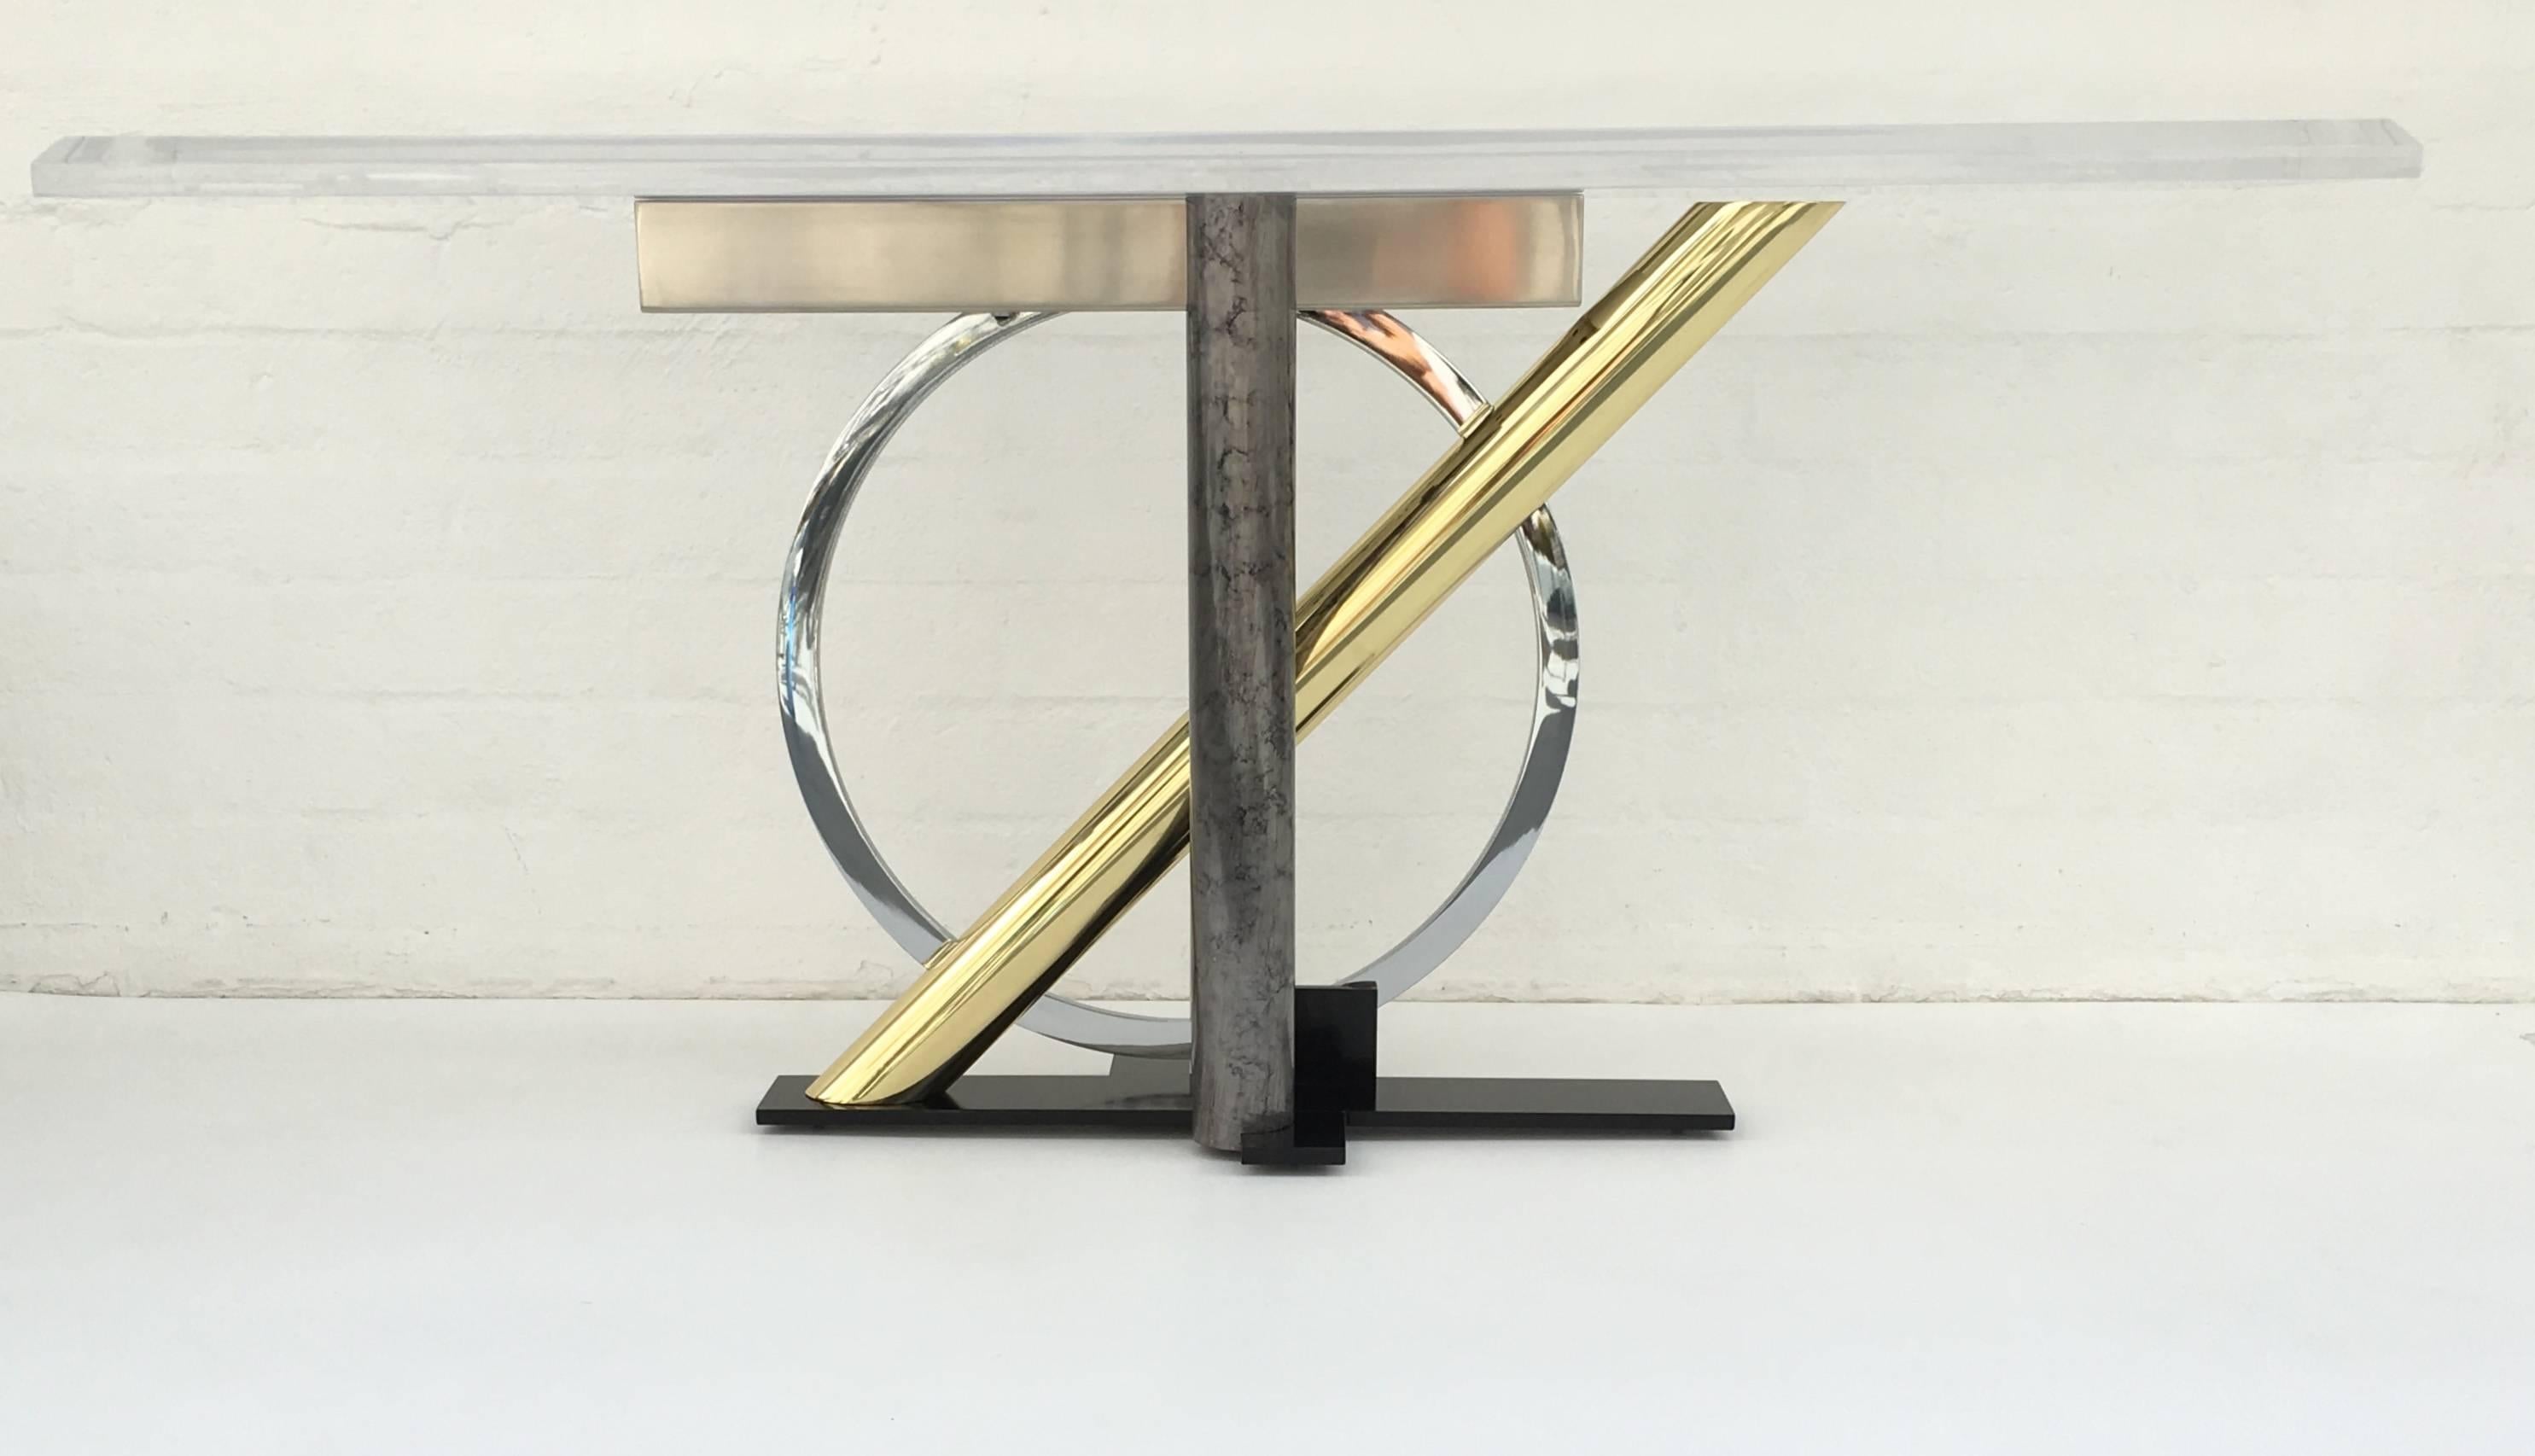 Post-Modern Sculptural Console Table by Kaizo Oto for Design Institute of America